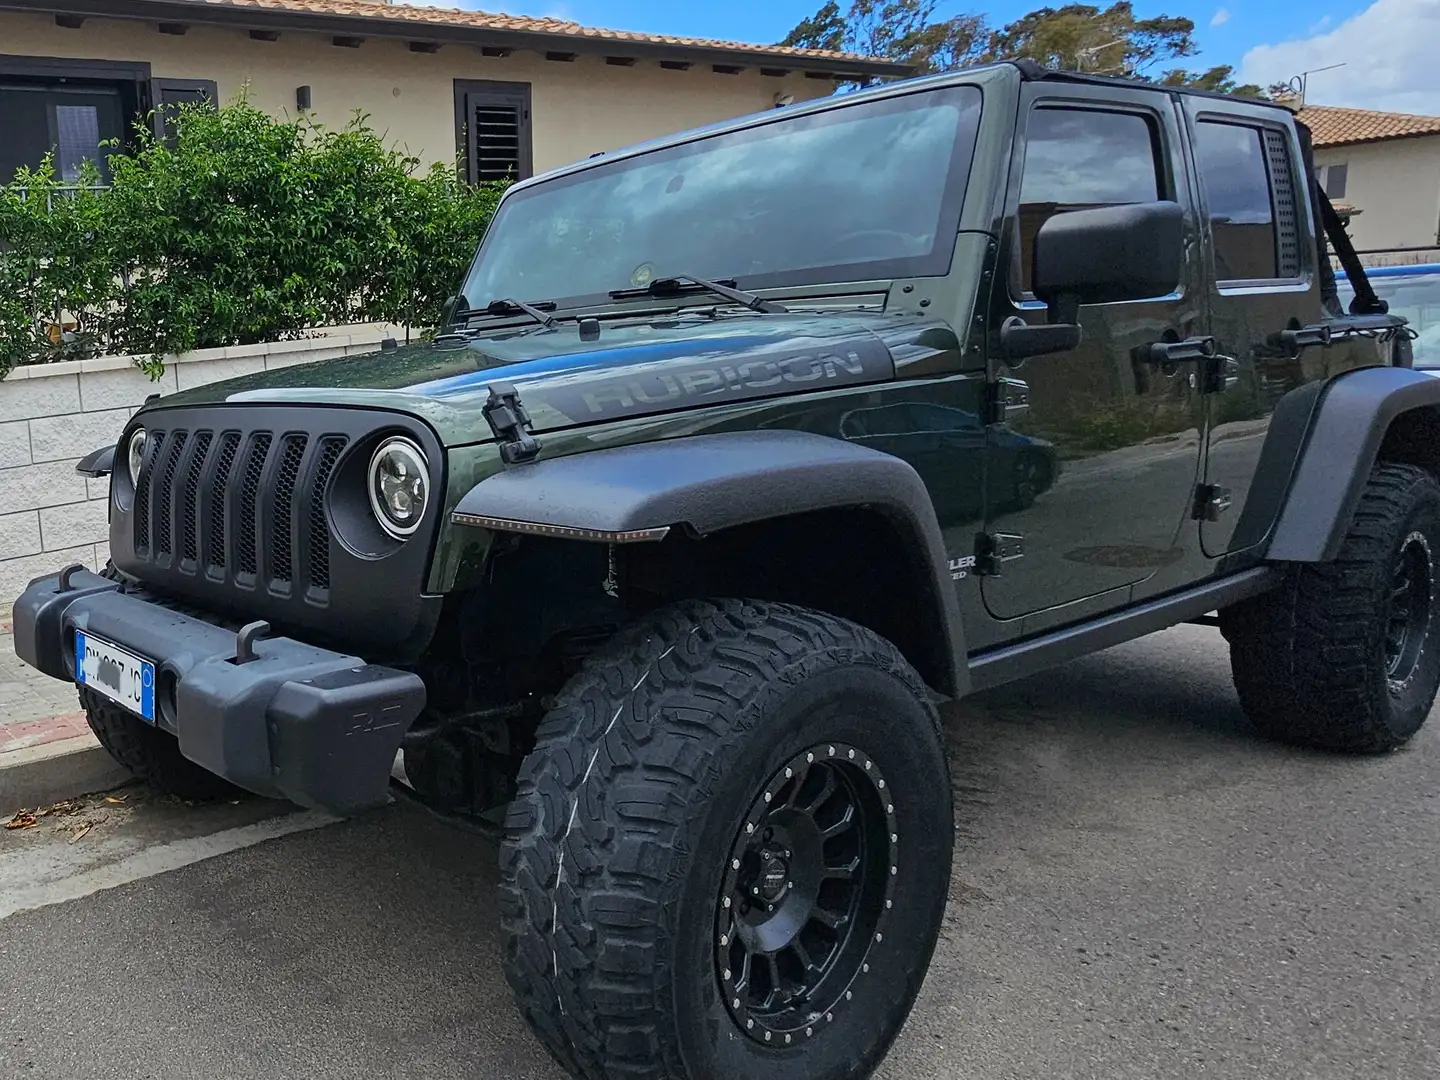 Jeep Wrangler Wrangler 2007 Unlimited Unlimited 2.8 crd Rubicon Verde - 2